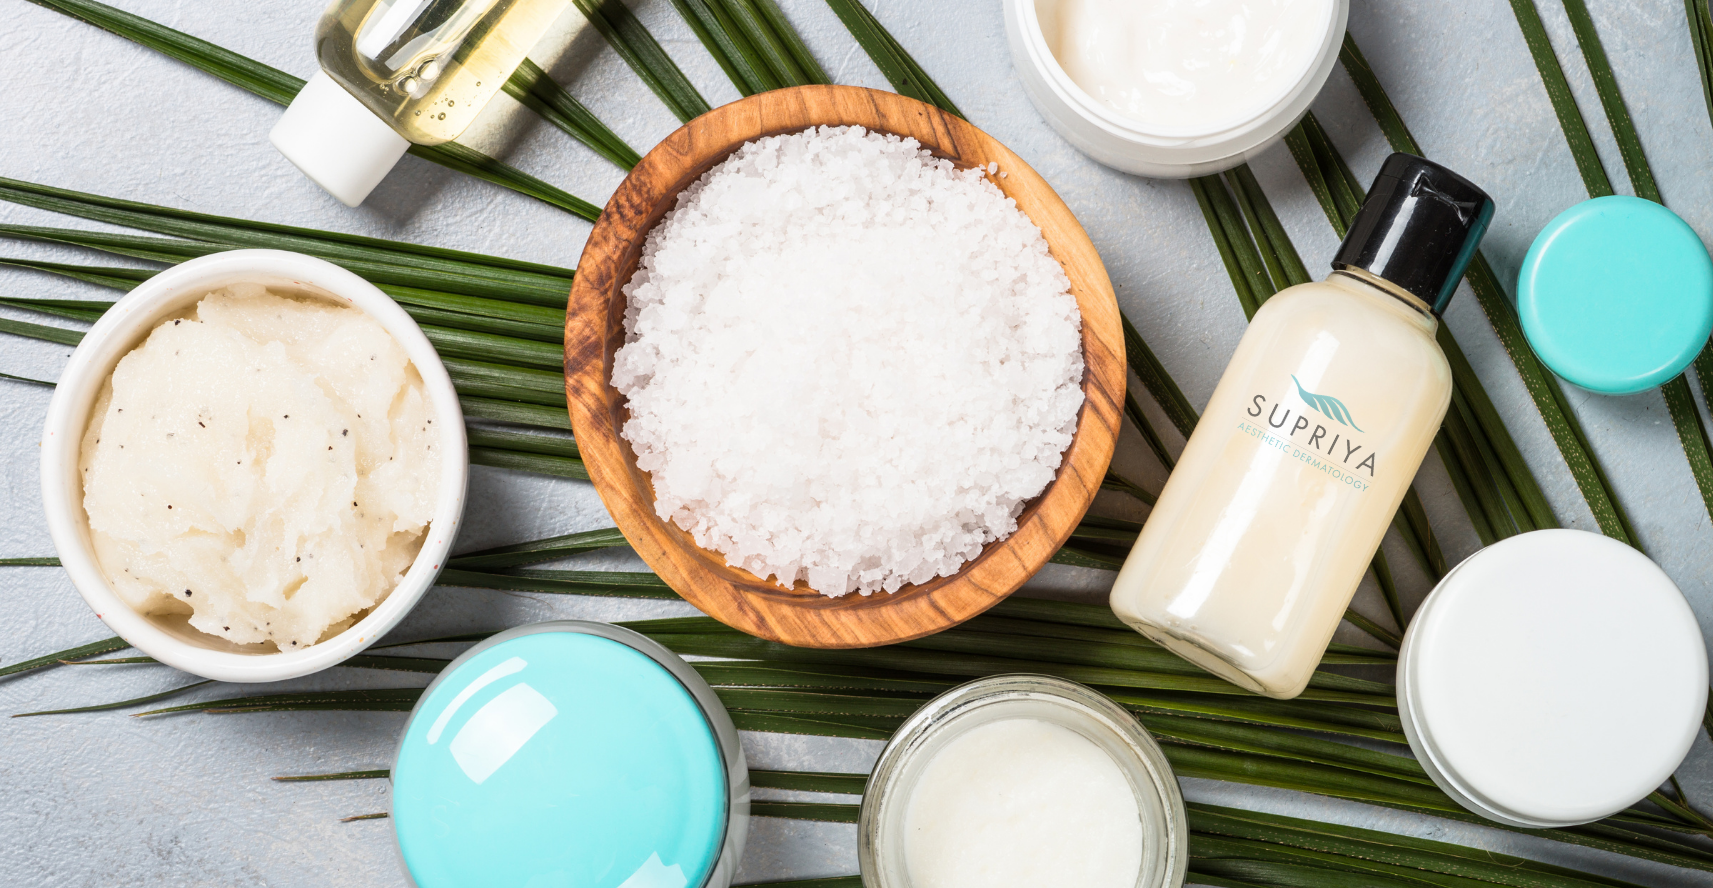 Skincare products in West Palm Beach | Supriya Tomar MD